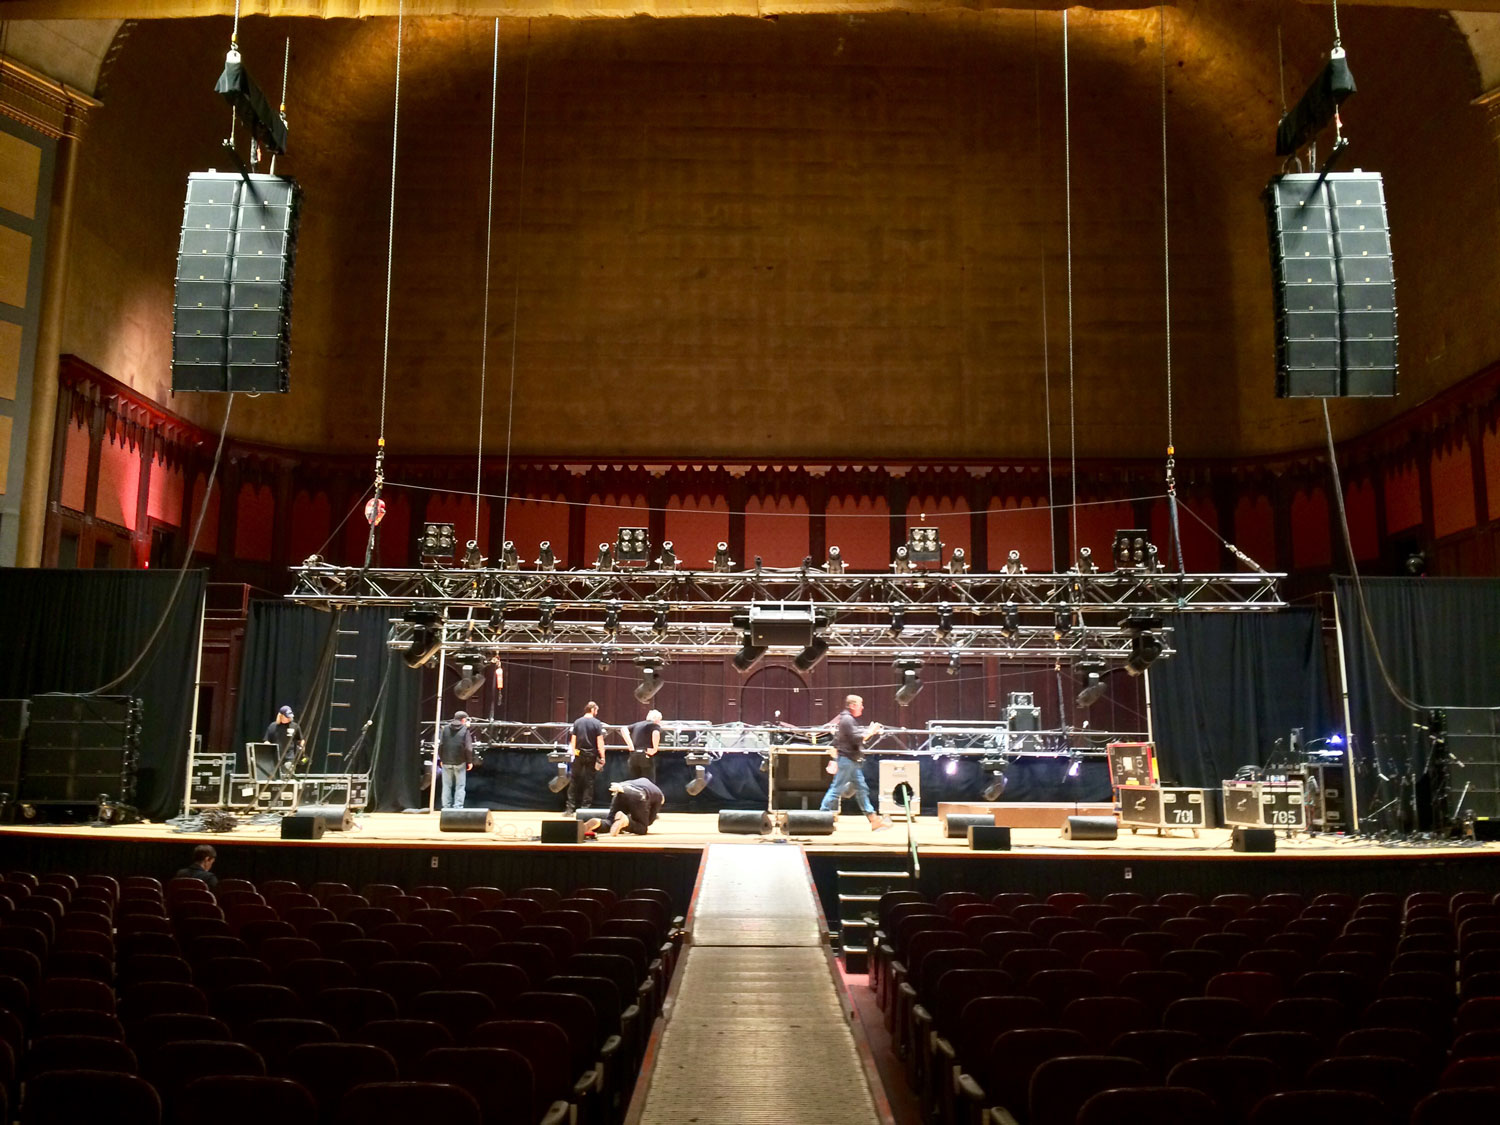 Load cell management. Massey Hall, Performings Arts Theatre, Toronto